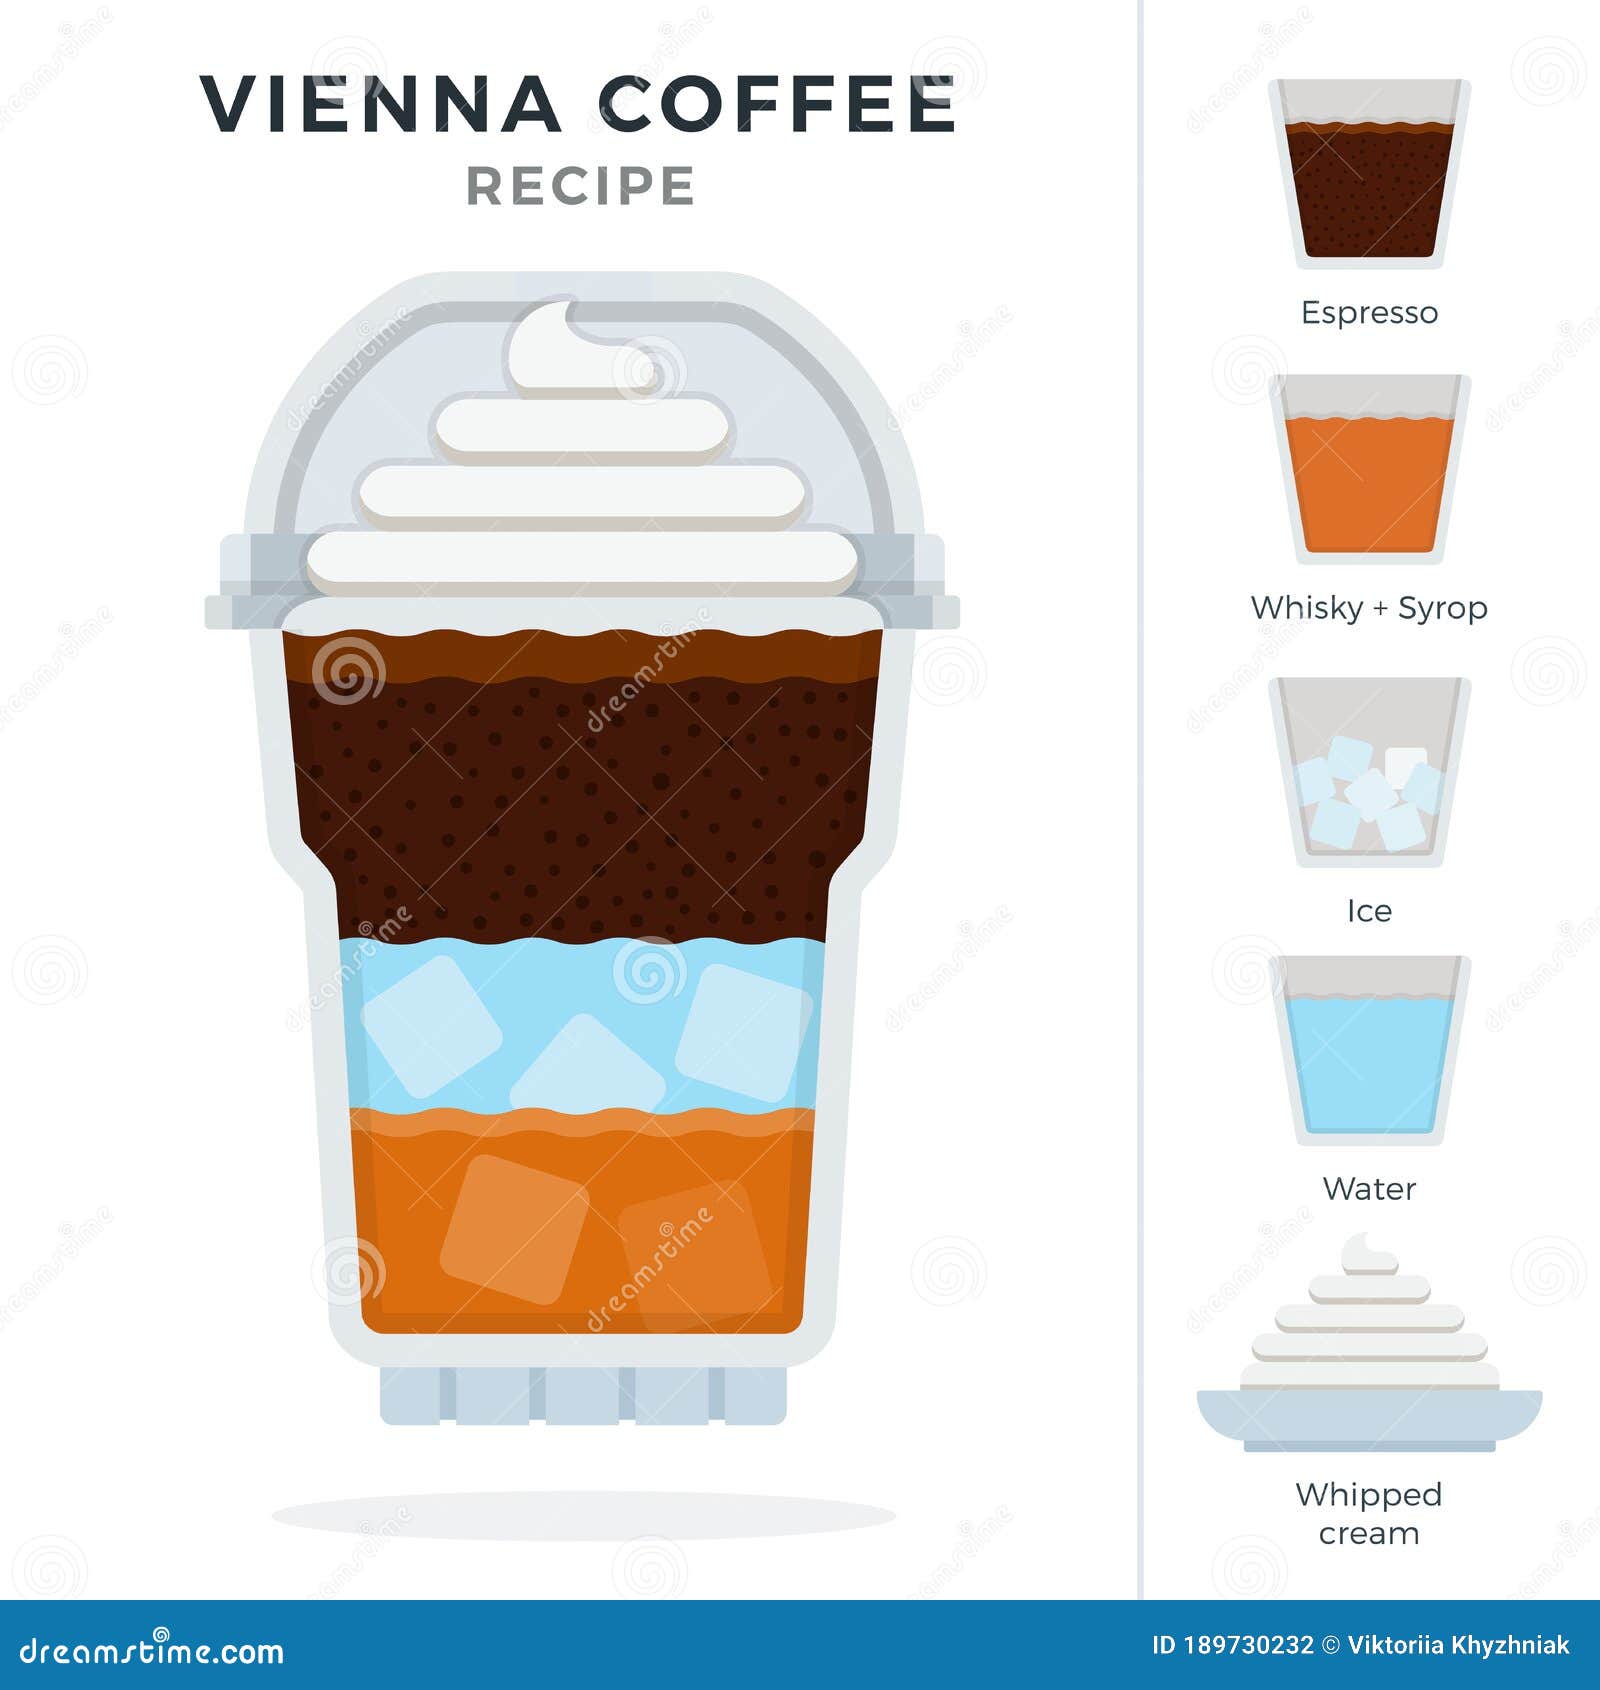 https://thumbs.dreamstime.com/z/vienna-ice-coffee-recipe-disposable-plastic-cup-dome-lid-espresso-whiskey-syrup-water-whipped-cream-vector-flat-189730232.jpg